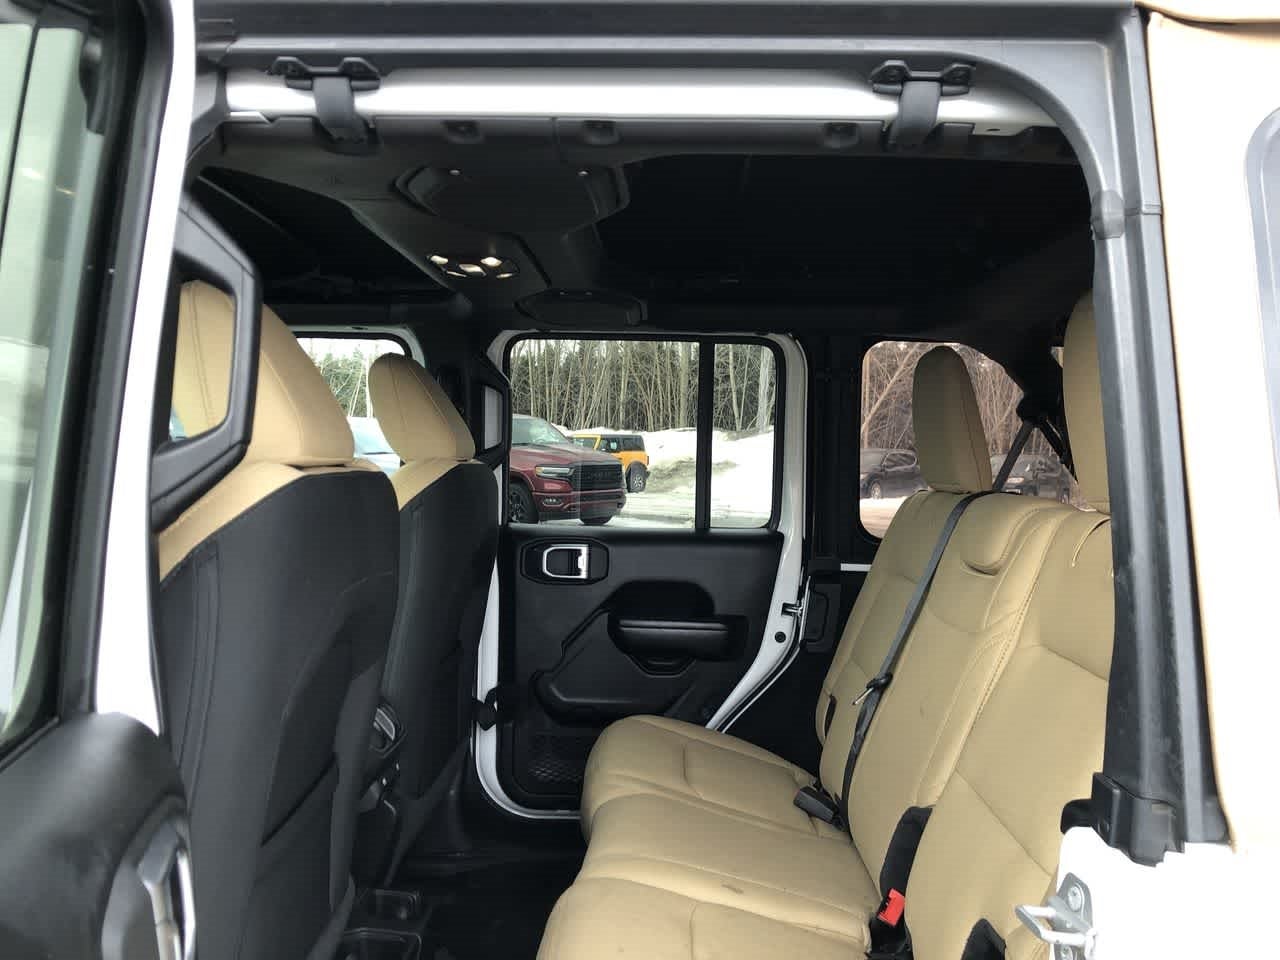 2020 Jeep Wrangler Unlimited Black and Tan